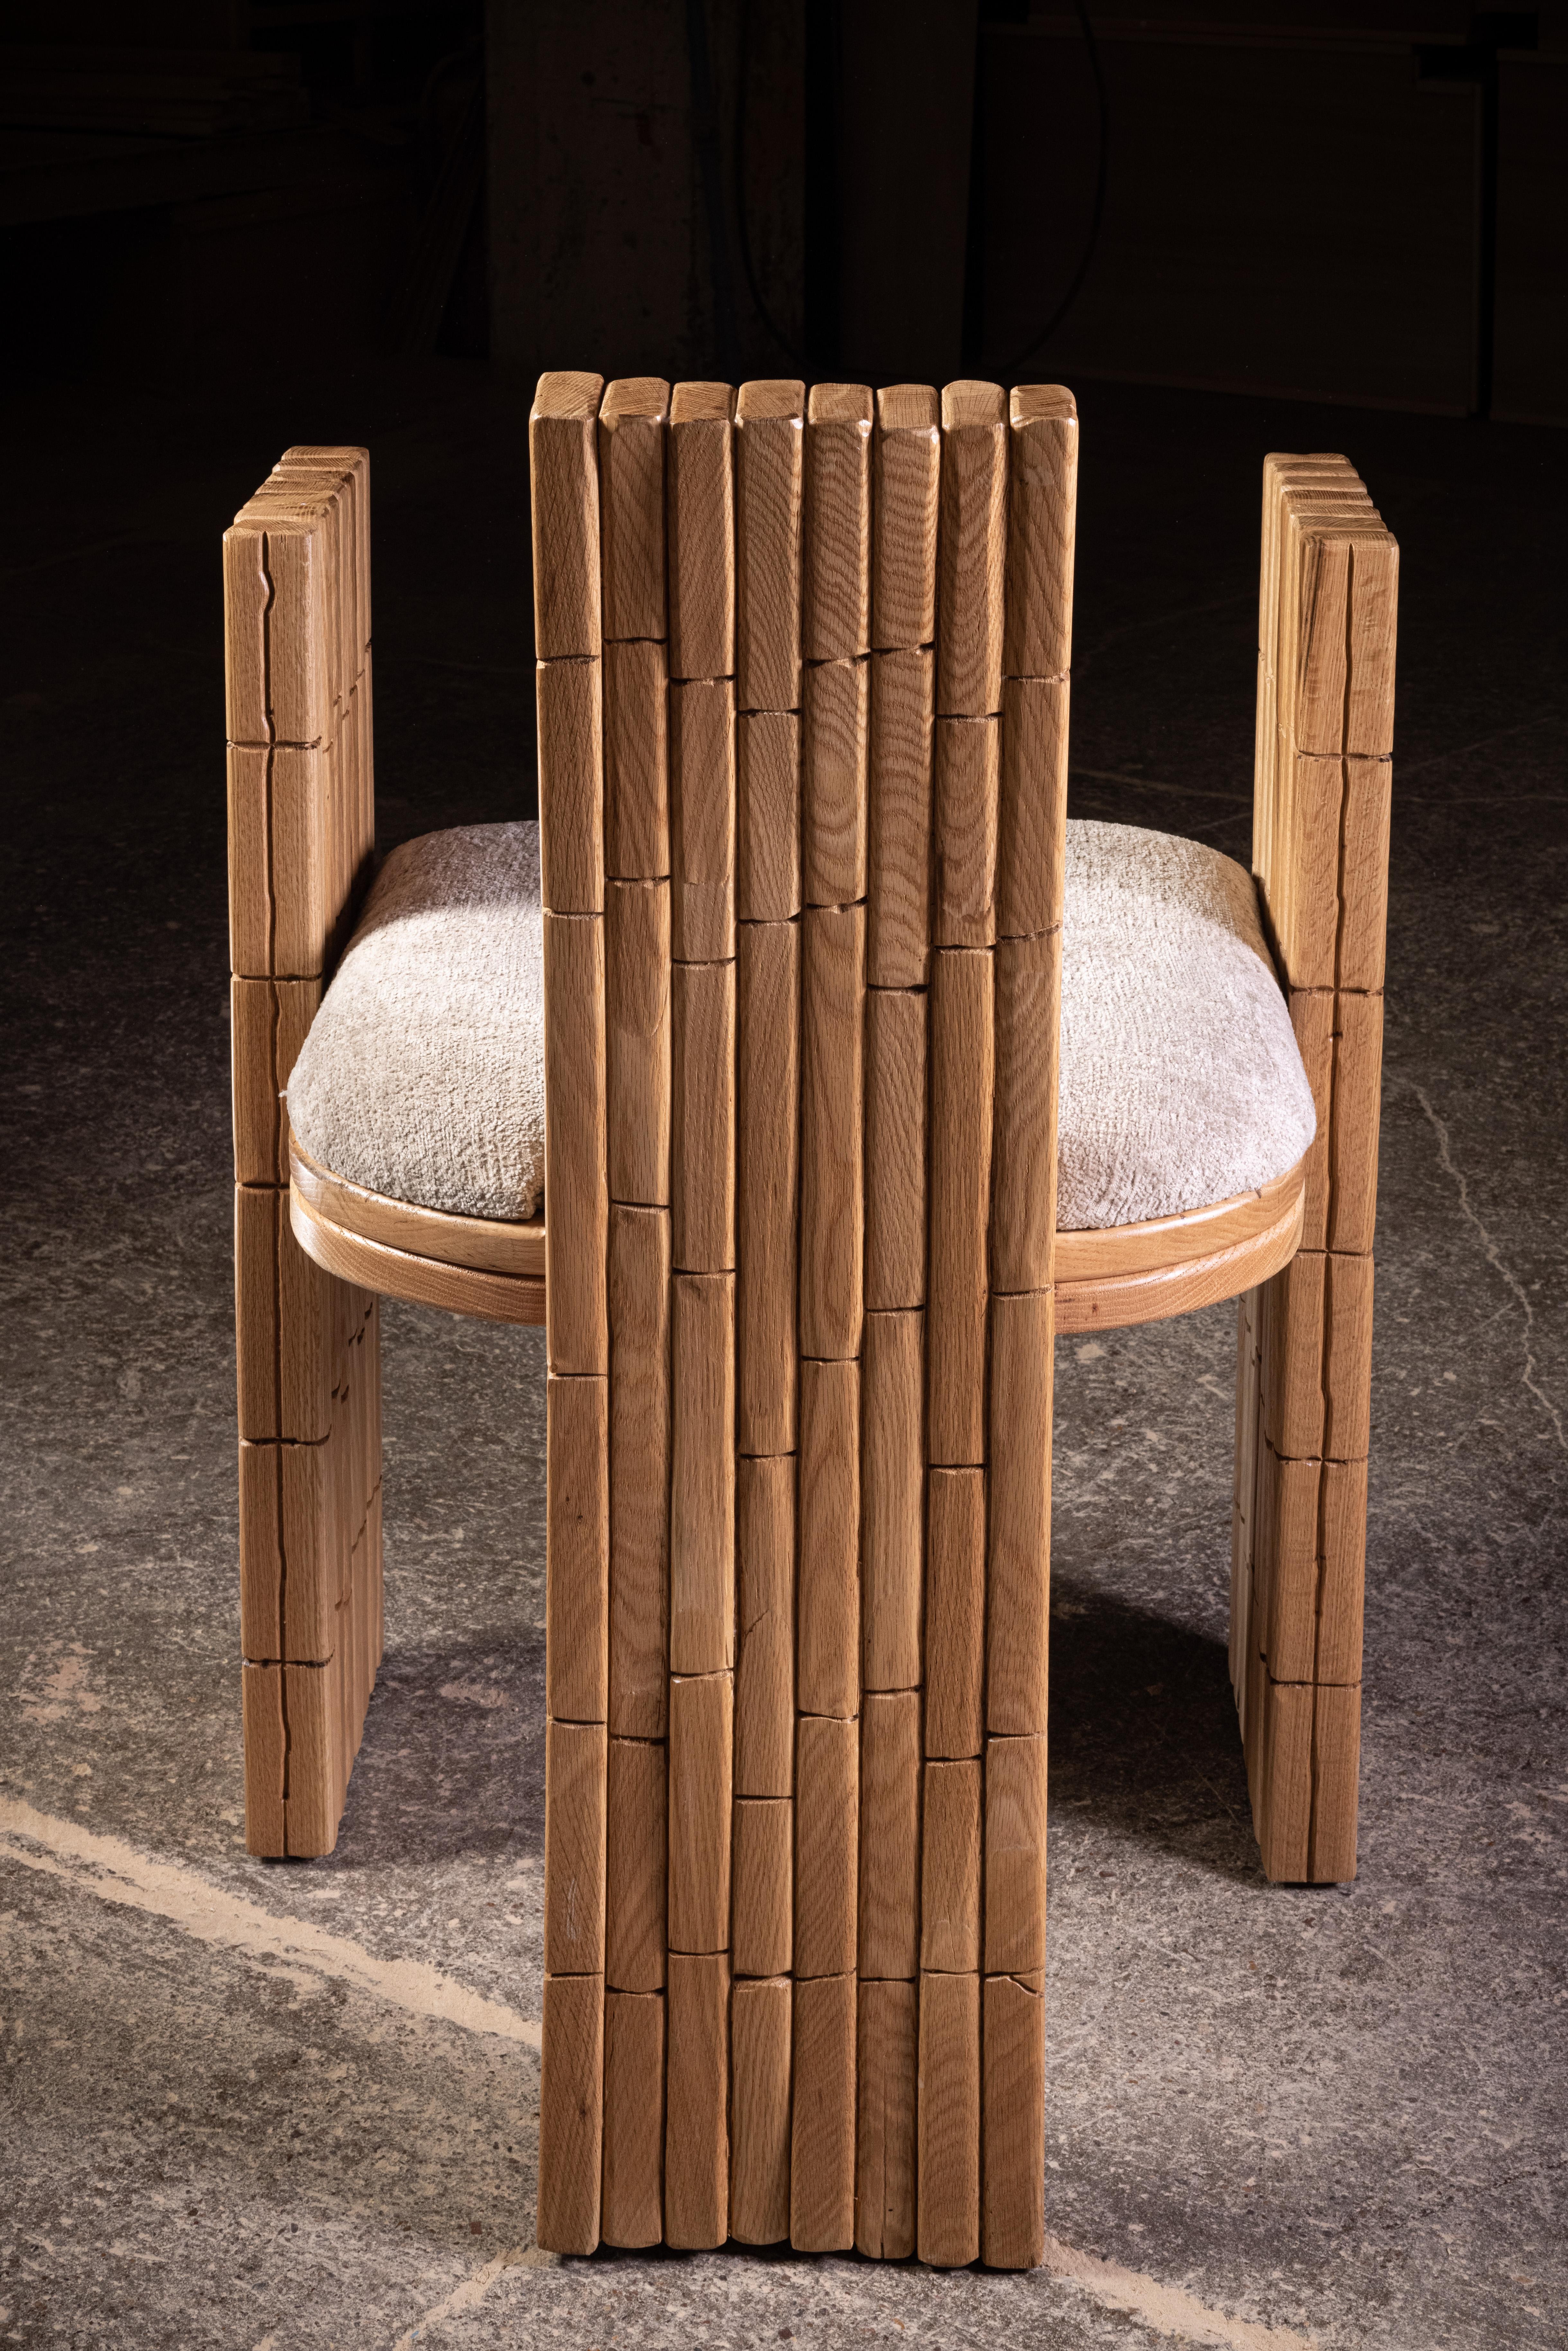 Homage to our favorite chairs.
Solid oak dining chair with bamboo shape.